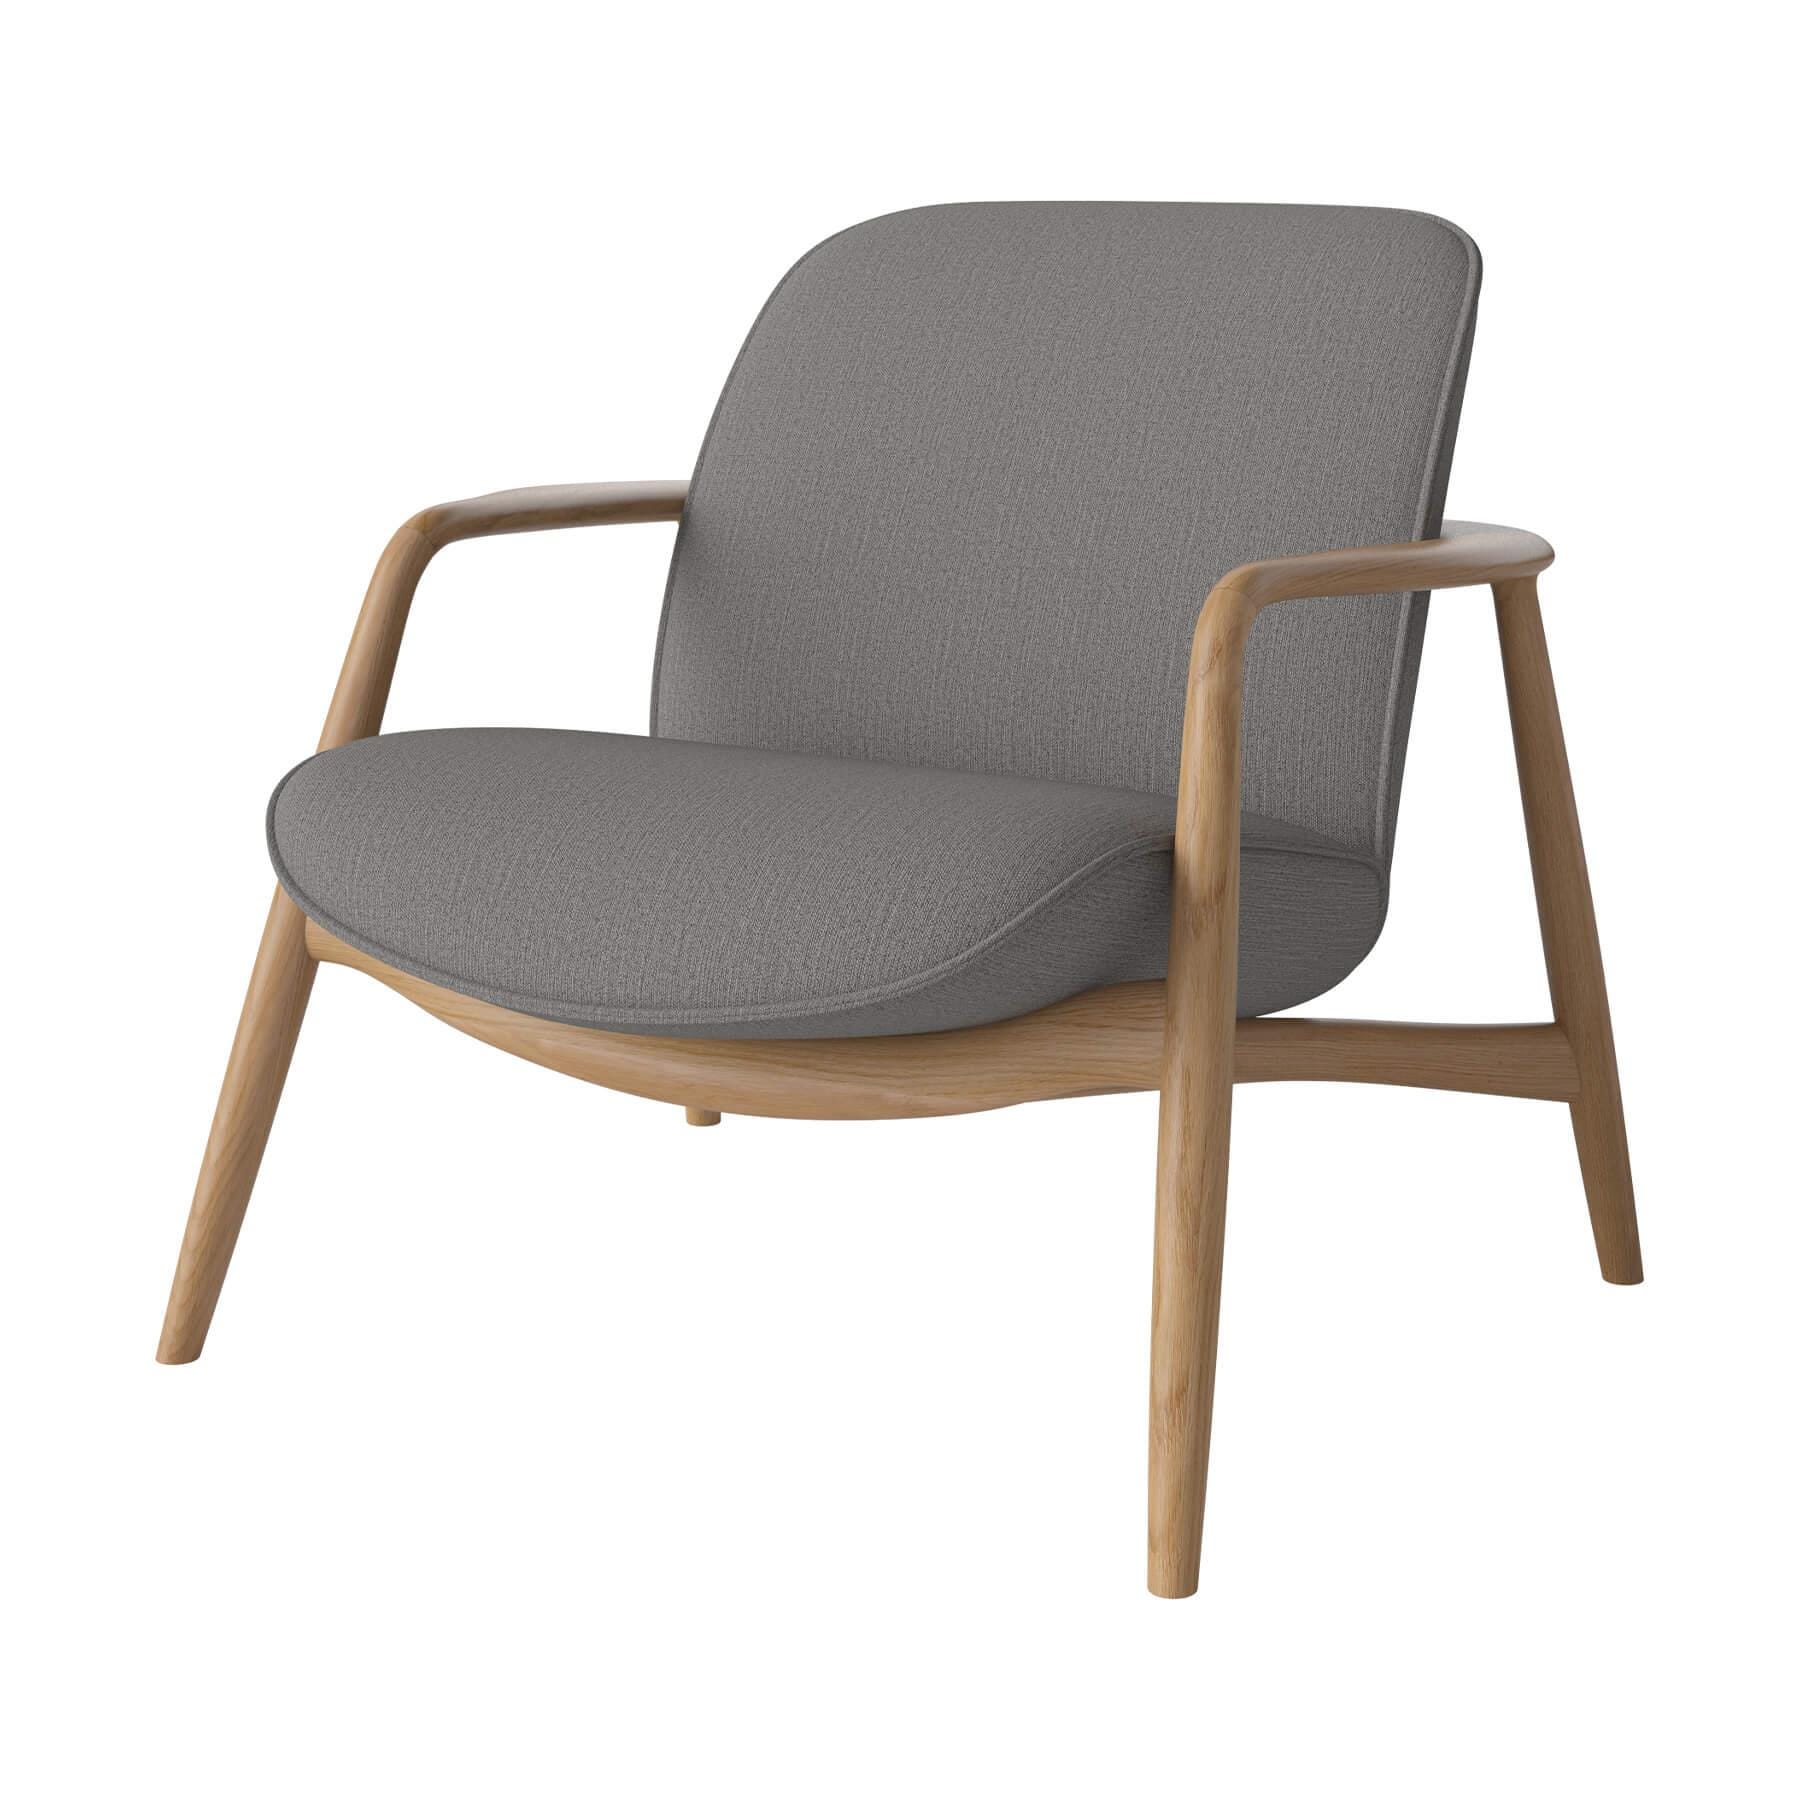 Bolia Bowie Armchair Oiled Oak Baize Steel Grey Designer Furniture From Holloways Of Ludlow